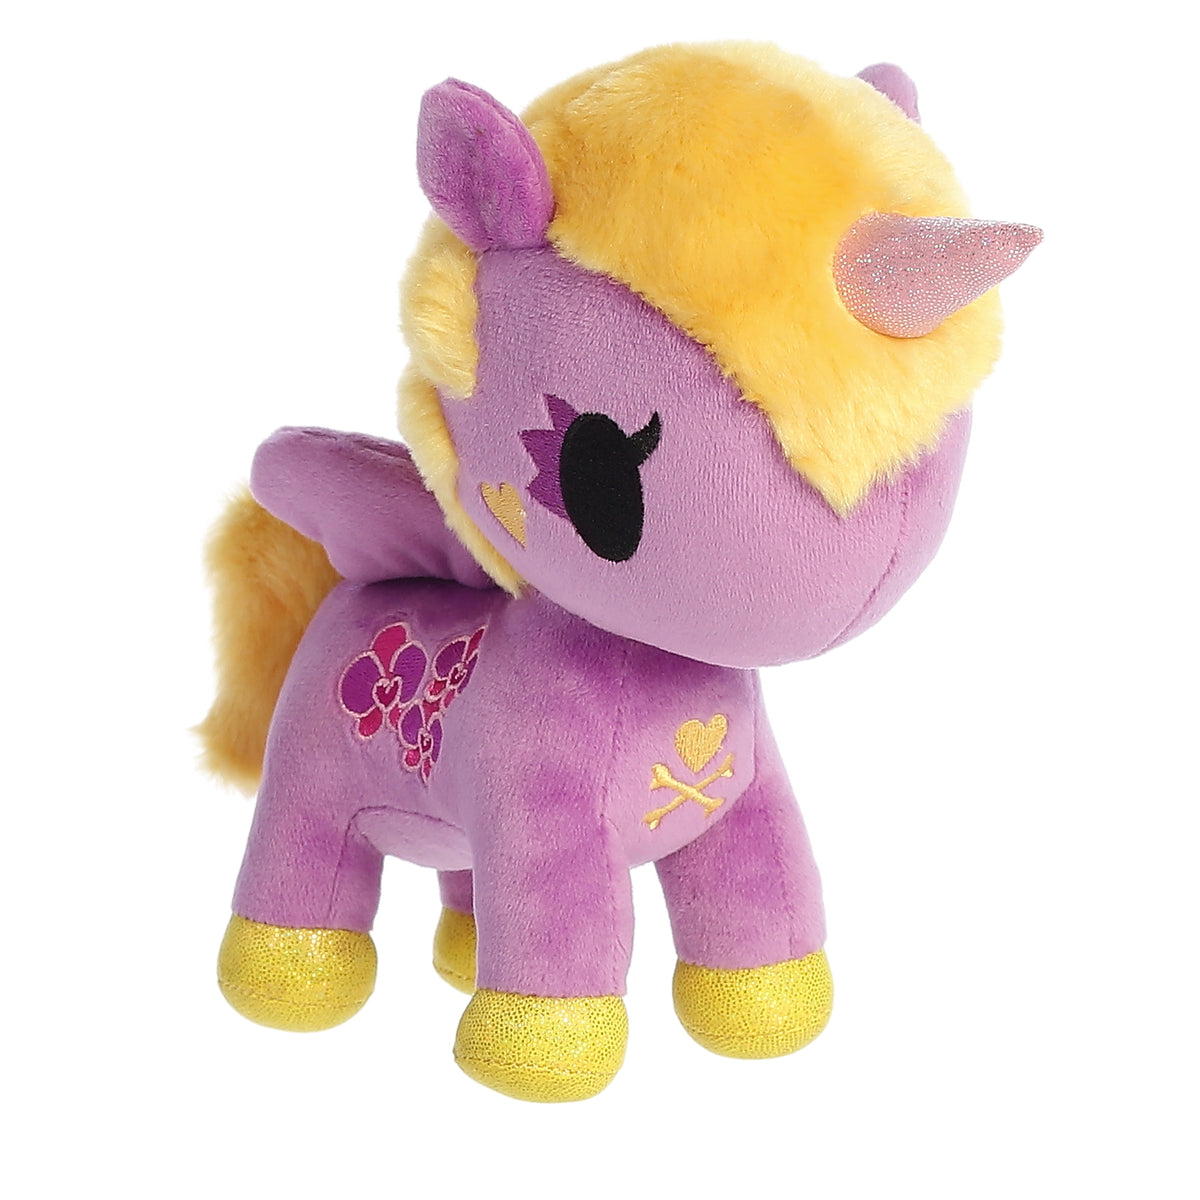 A unicorn with a purple horn, yellow fur and hooves, and a delicately embroidered orchid symbol on its side.